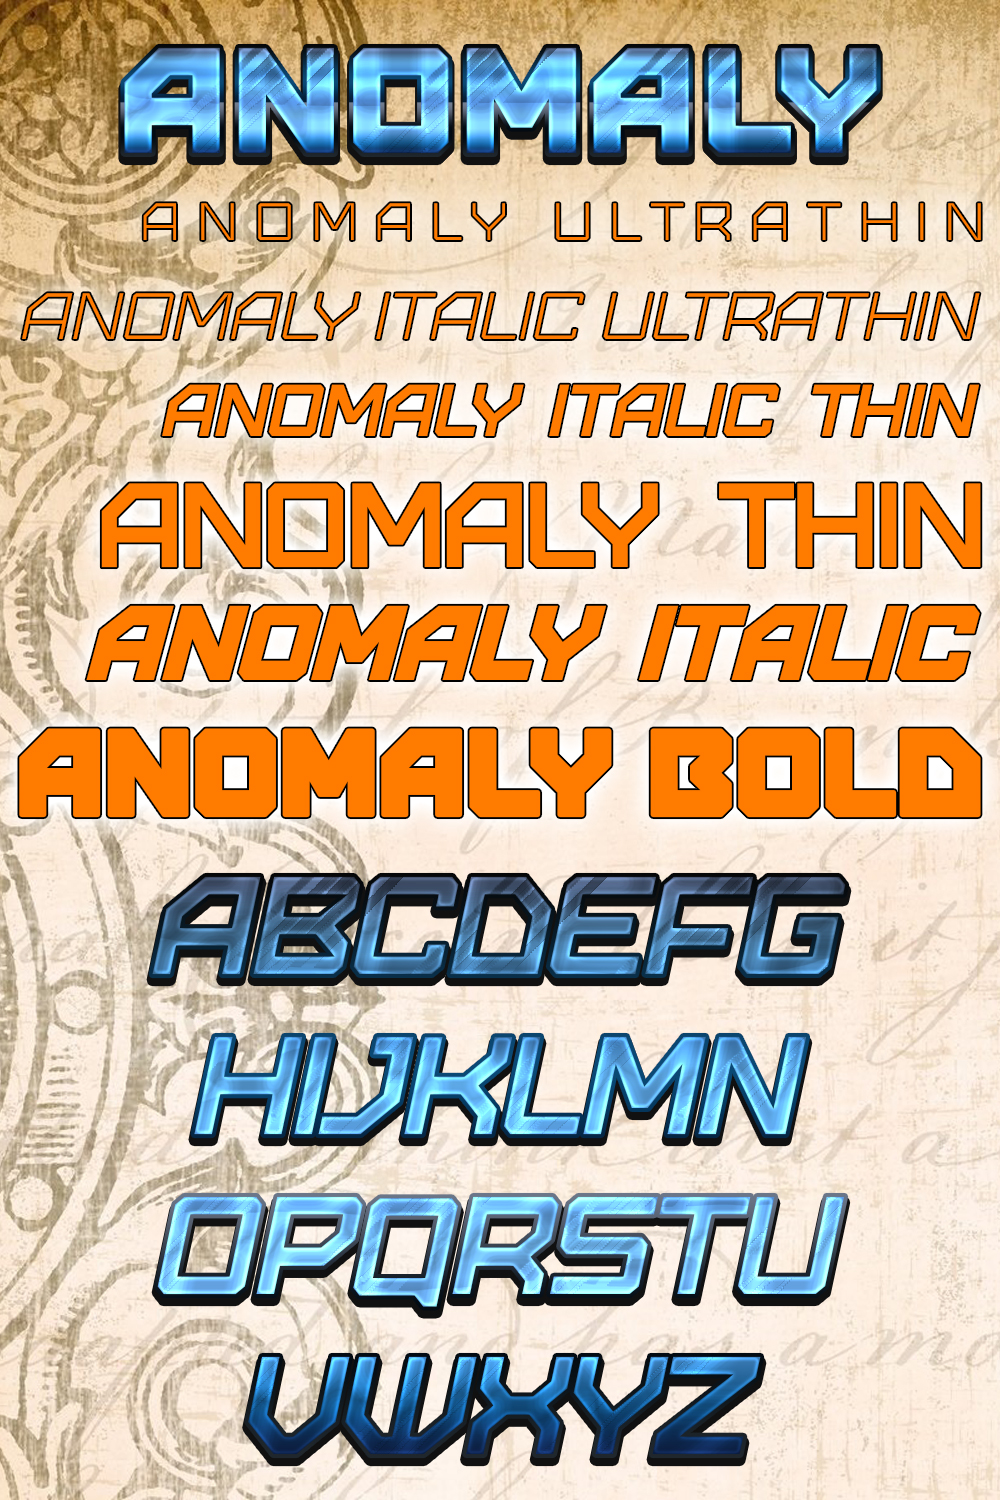 Anomaly font of pinterest.